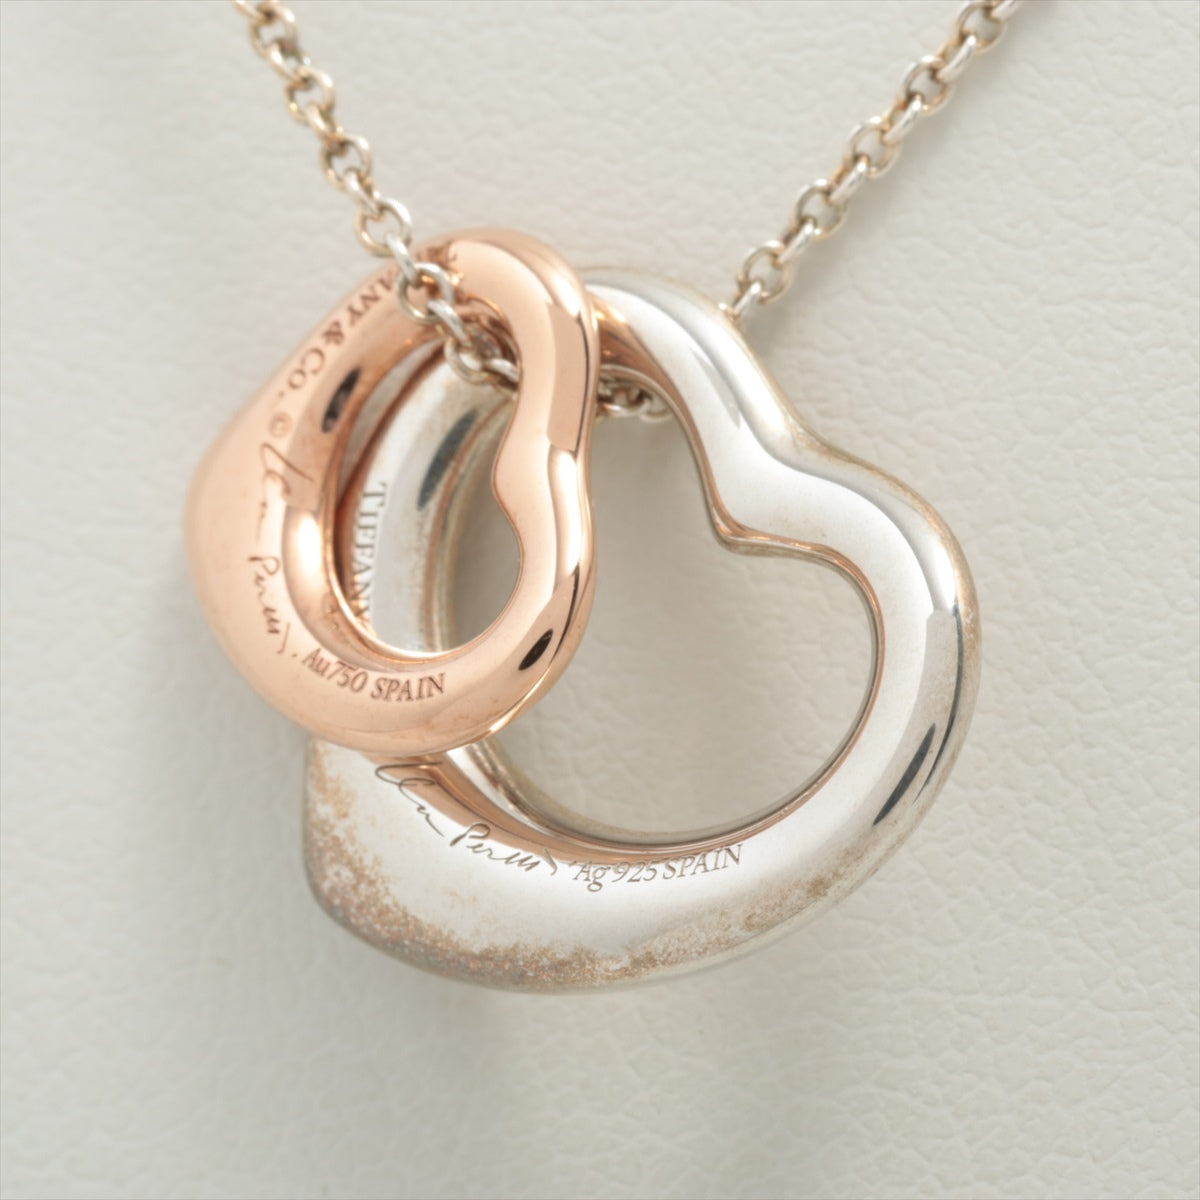 Tiffany Double Open Heart Necklace 925×750 4.3g Silver